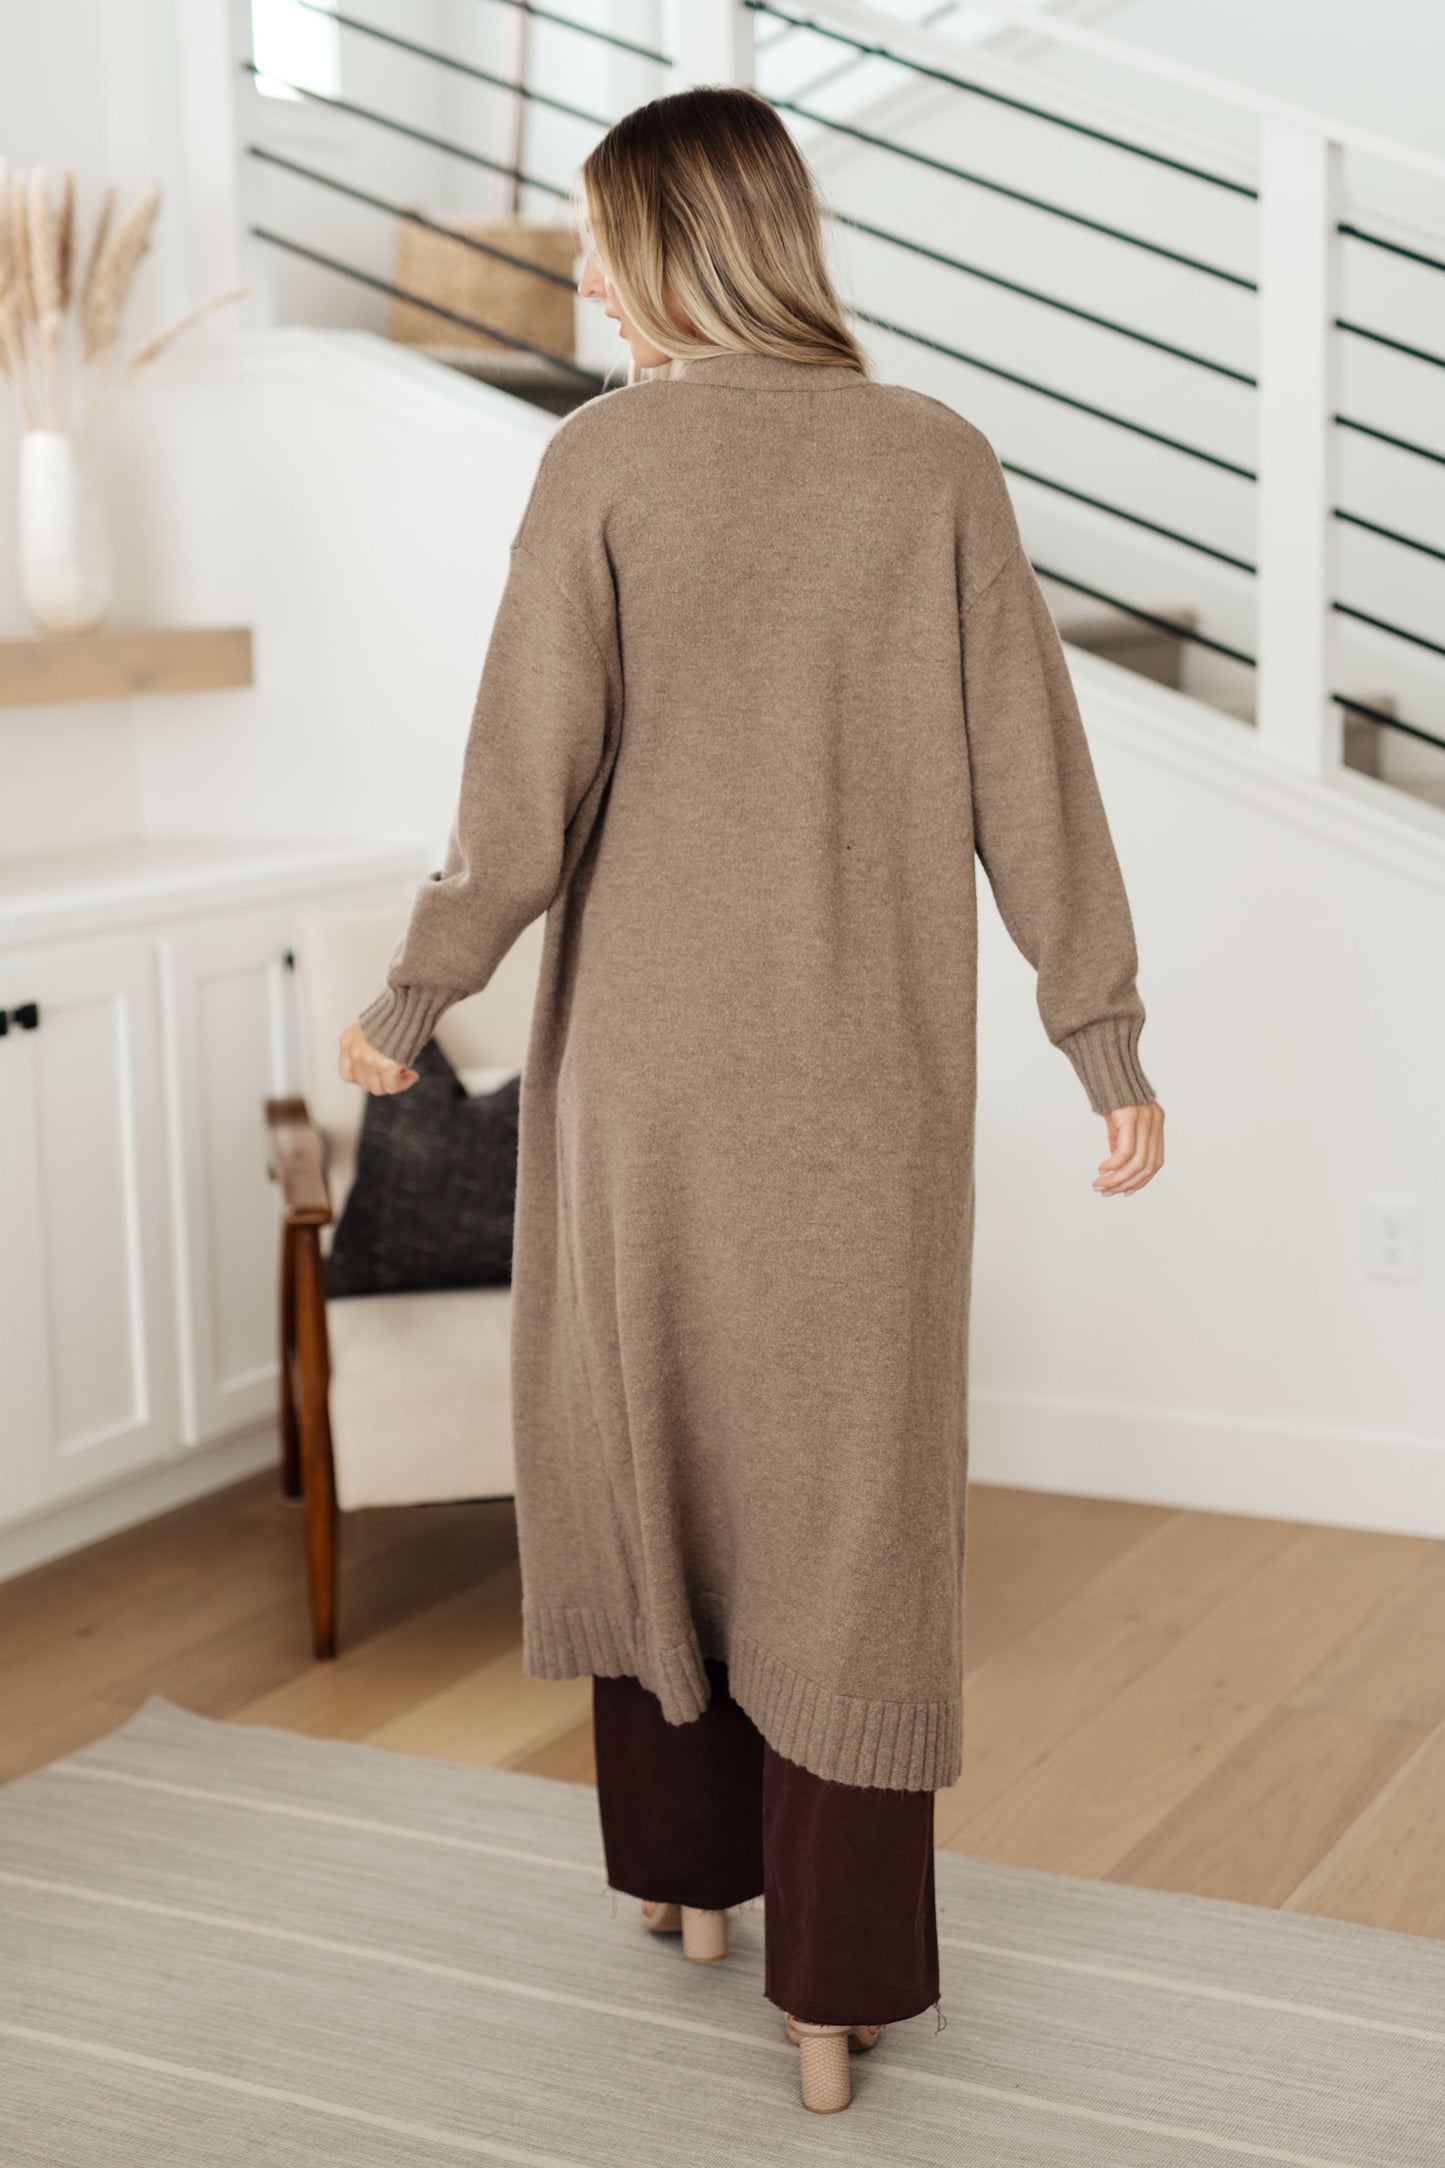 Upgrade your wardrobe this season with this Perfectly Resolved Duster Cardigan. Featuring a warm sweater knit, neutral tone, and duster length, this cardigan pairs perfectly with the perfectly resolved sweater tank for a beautiful timeless look in SLO.